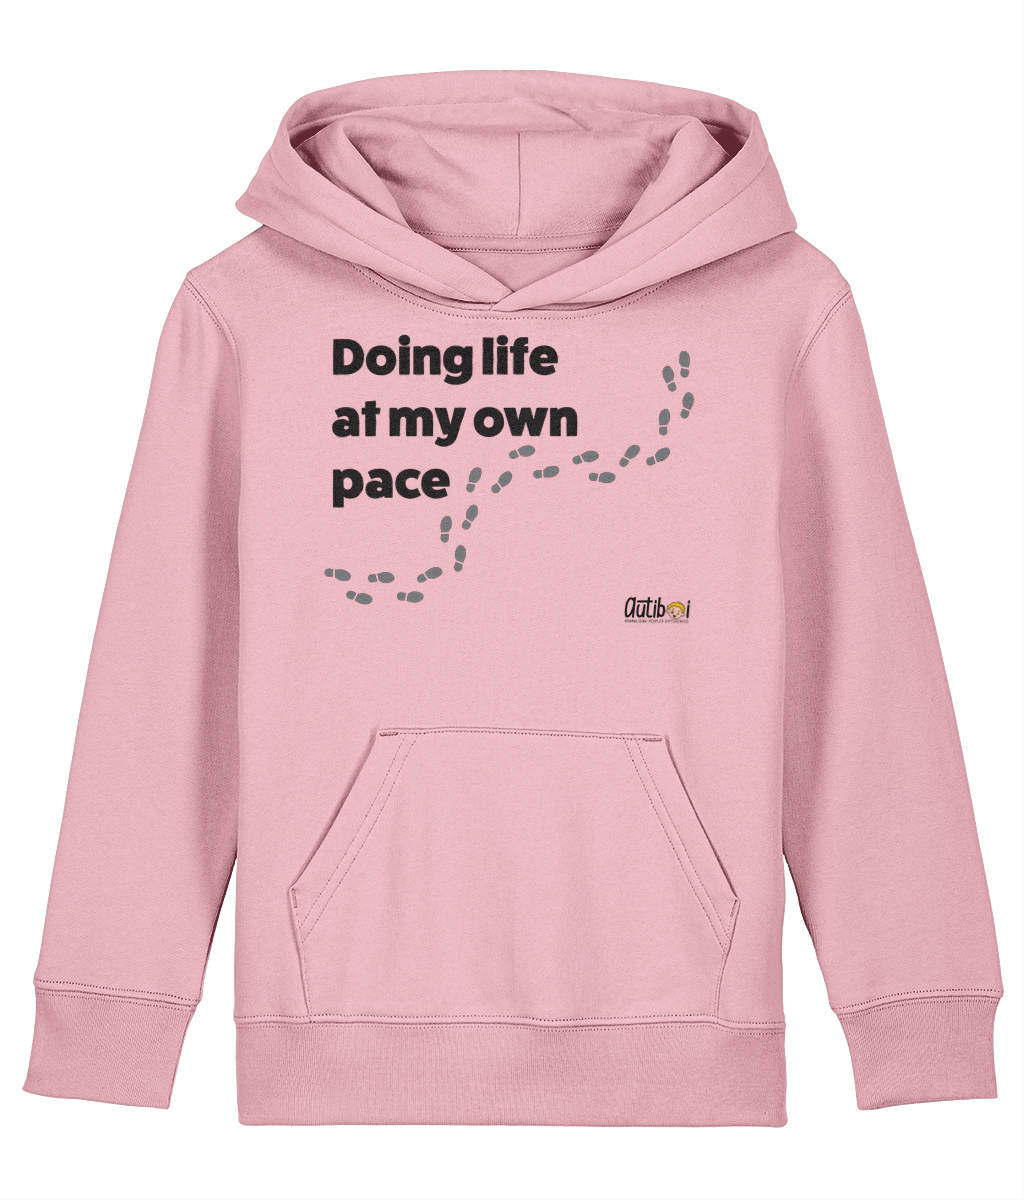 Doing Life At My Own Pace - Kids Hoodie